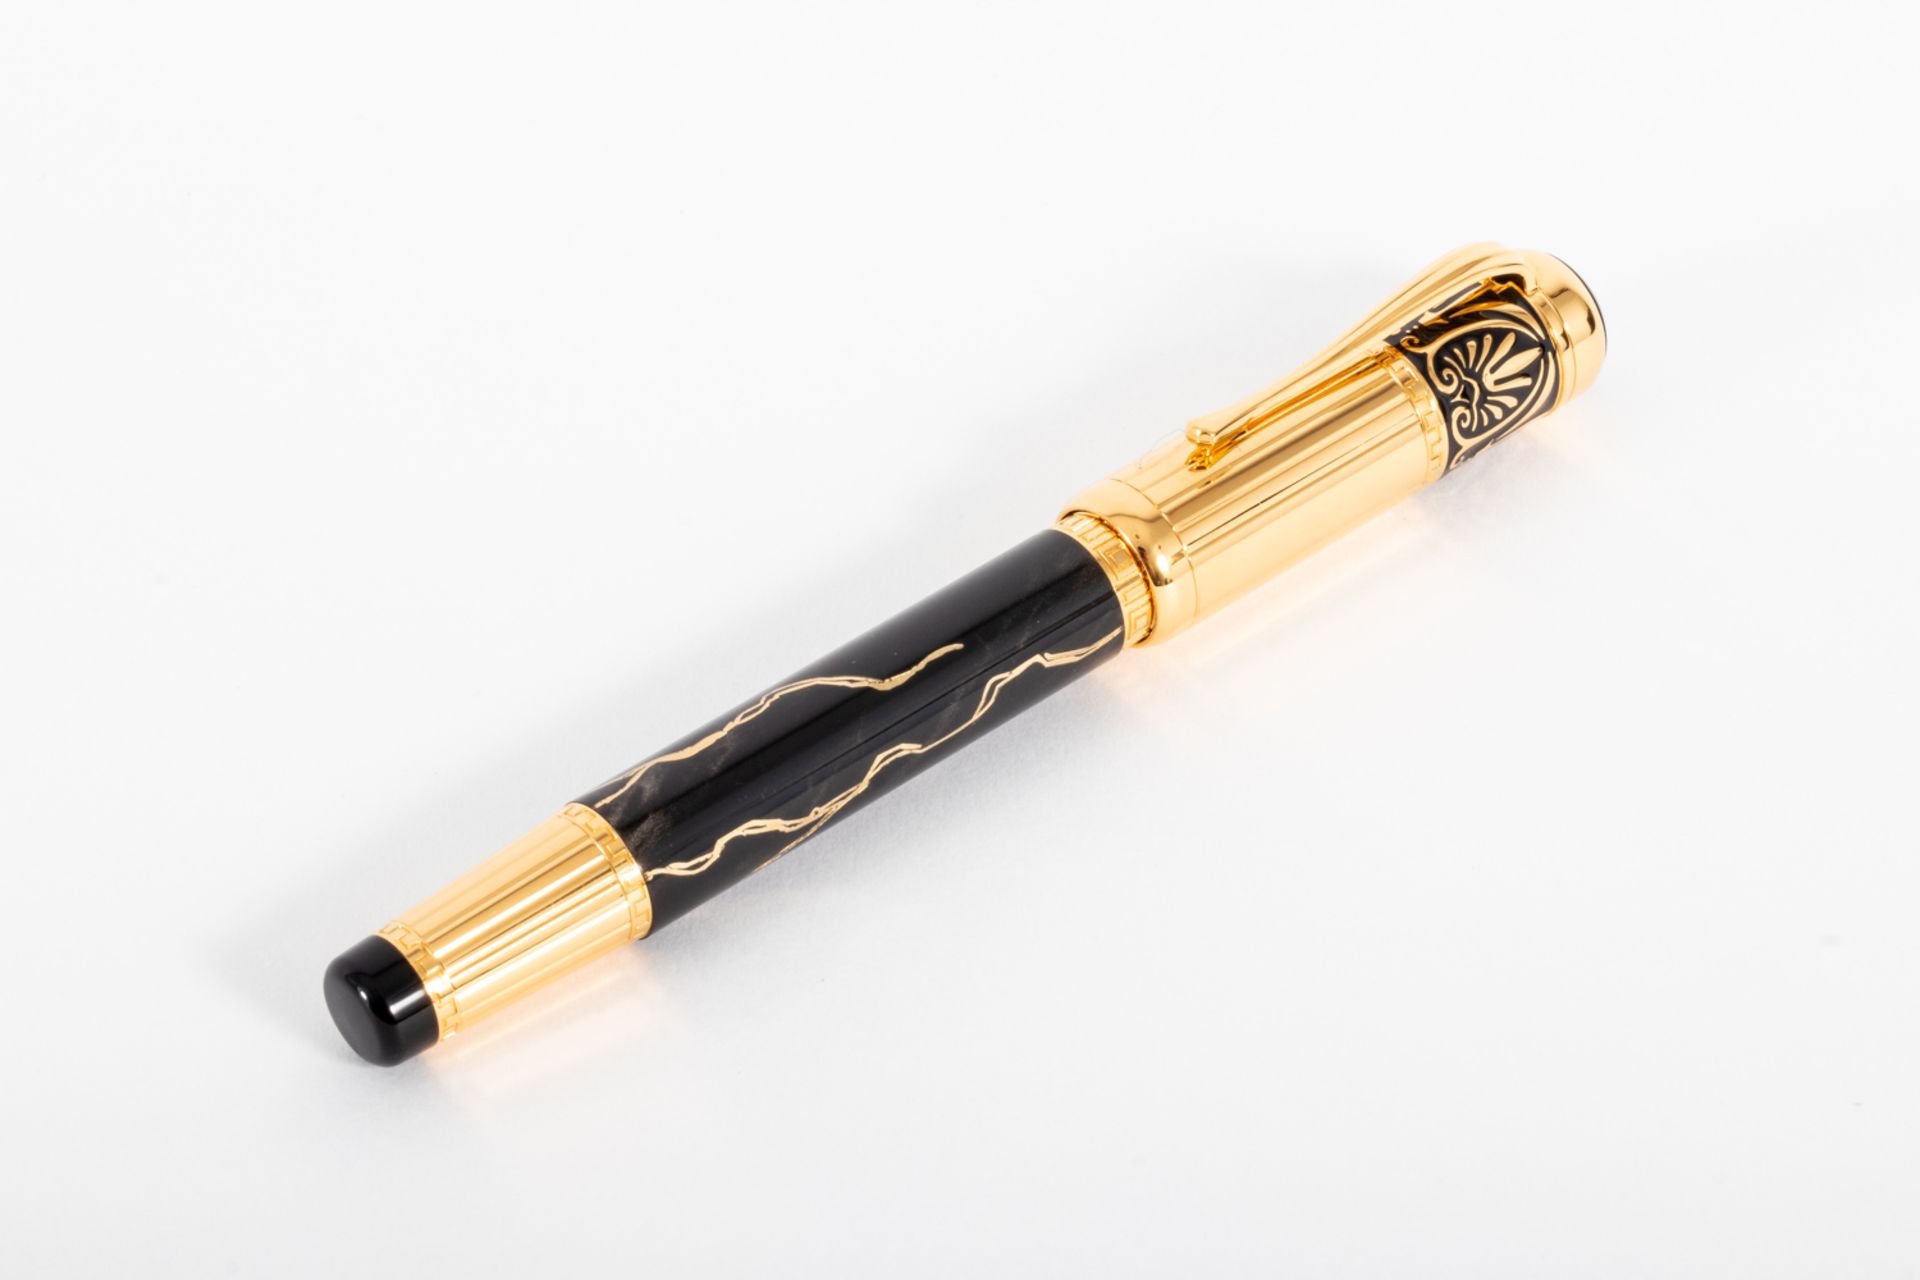 Montblanc fountain pen collection "Patron of Art" model "Alexander the Great", 1998. 